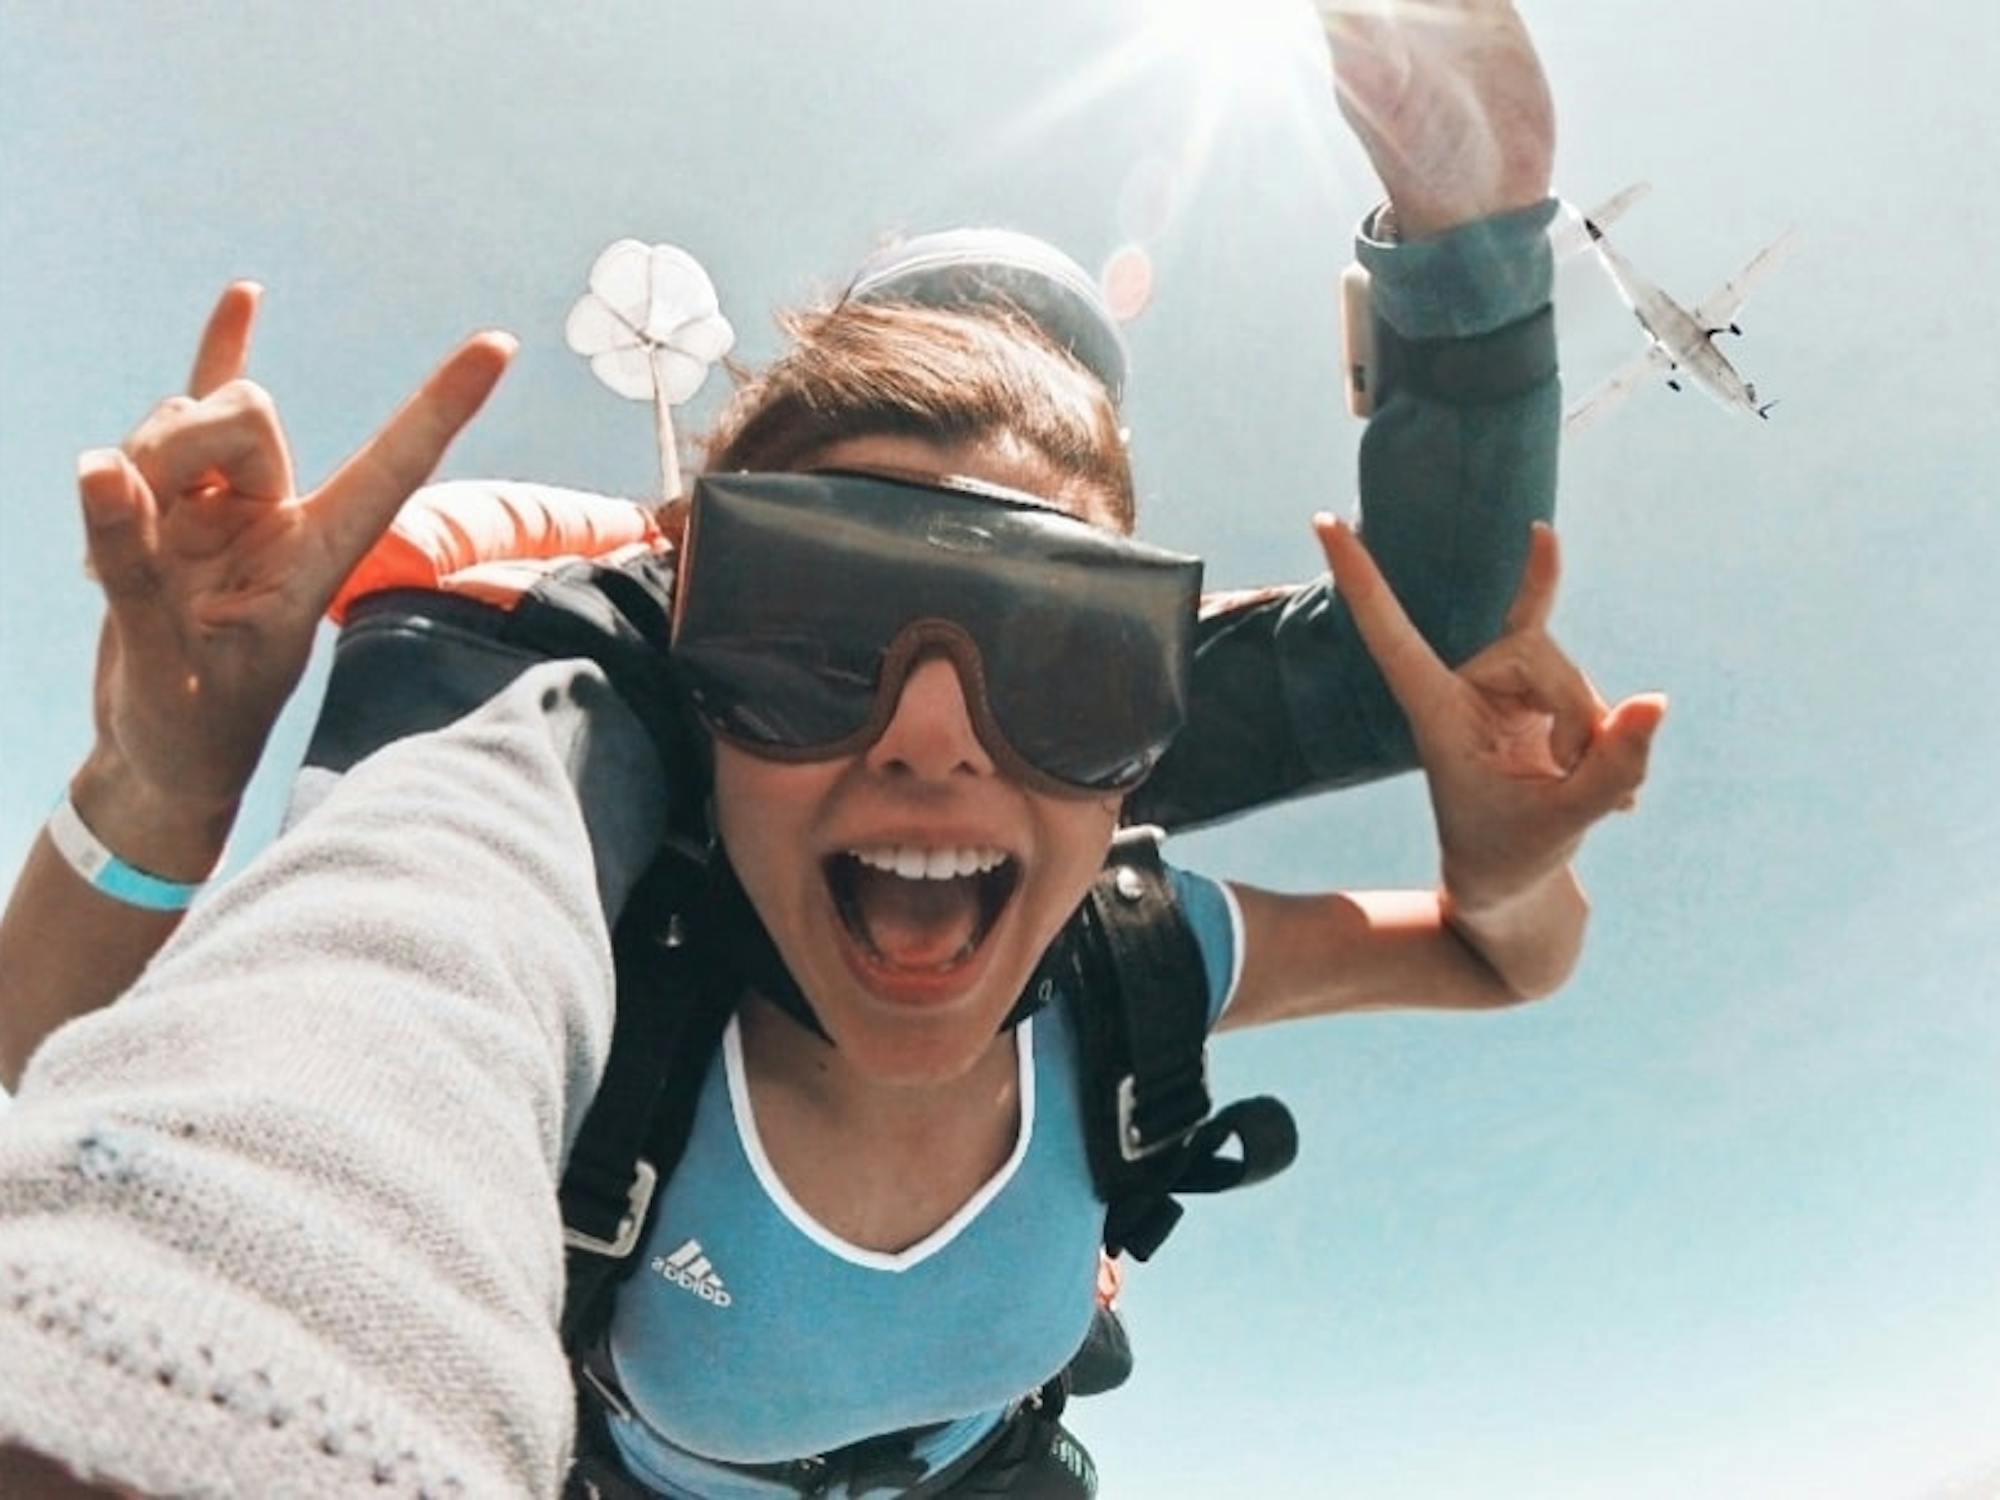 A young woman throws up horns while tandem-skydiving through the air. A plane flies past in the background above